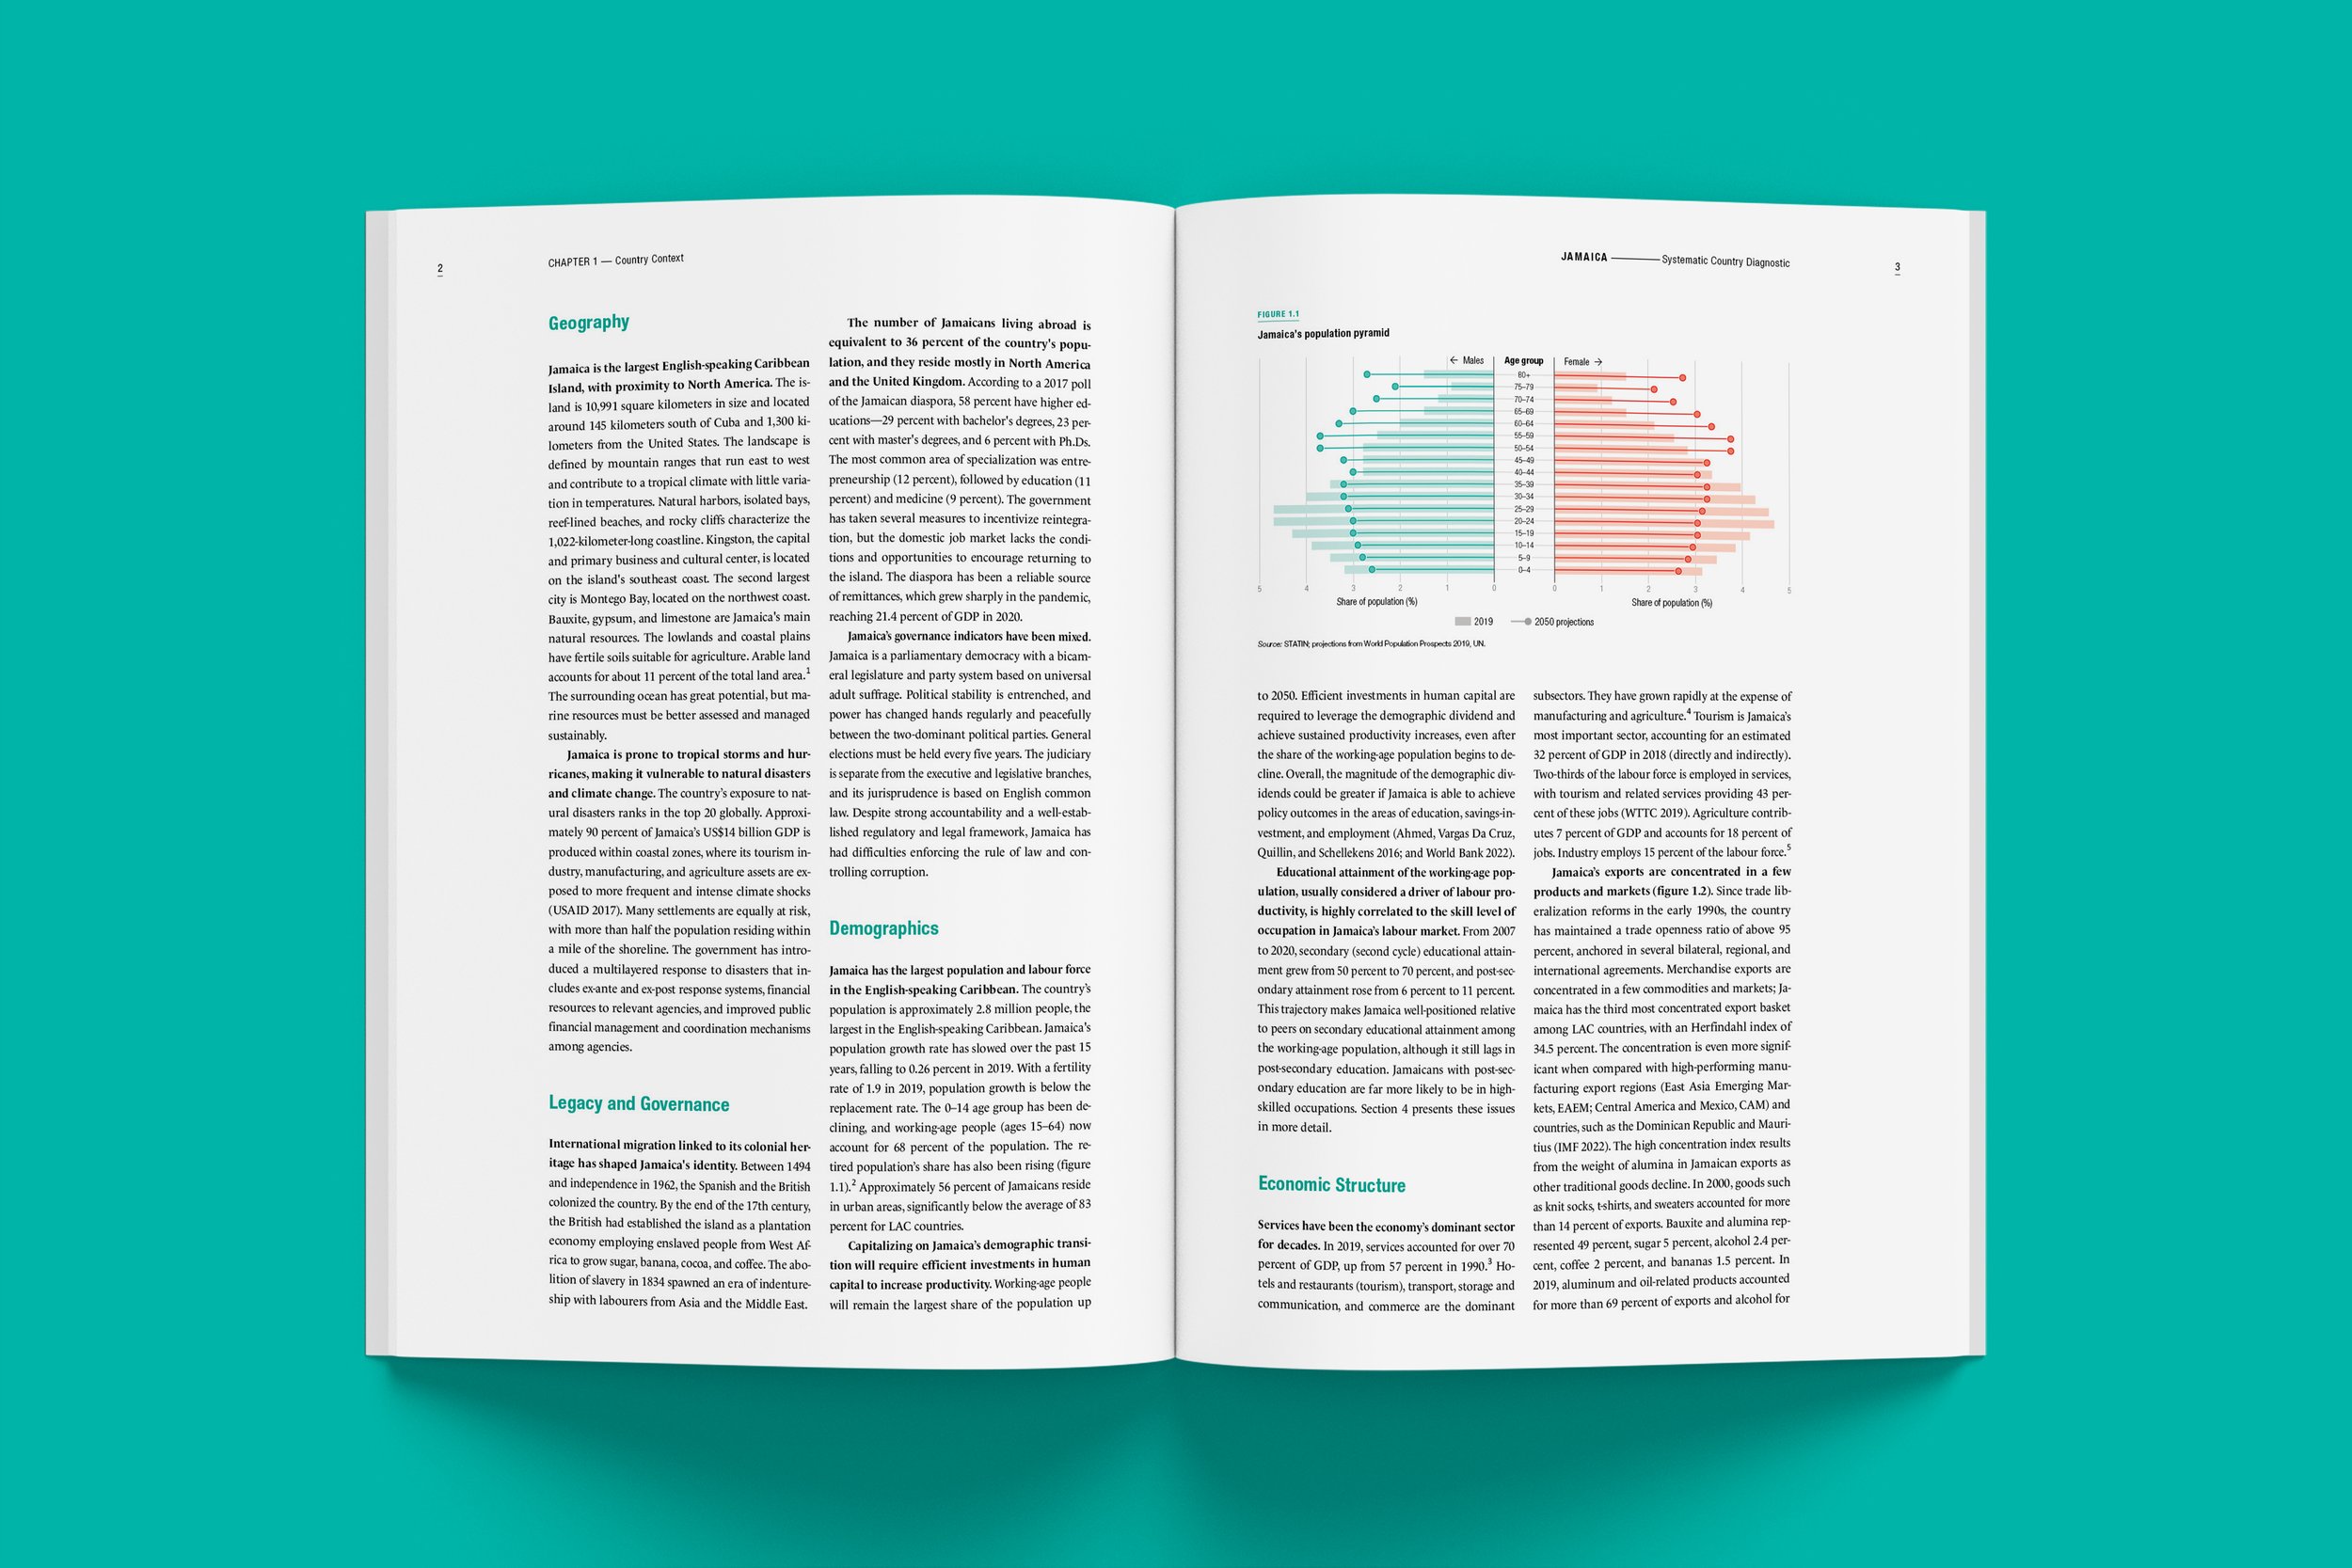 Information design and report layout produced by Designed for Humans for the World Bank Jamaica - Systematic Country Diagnostic